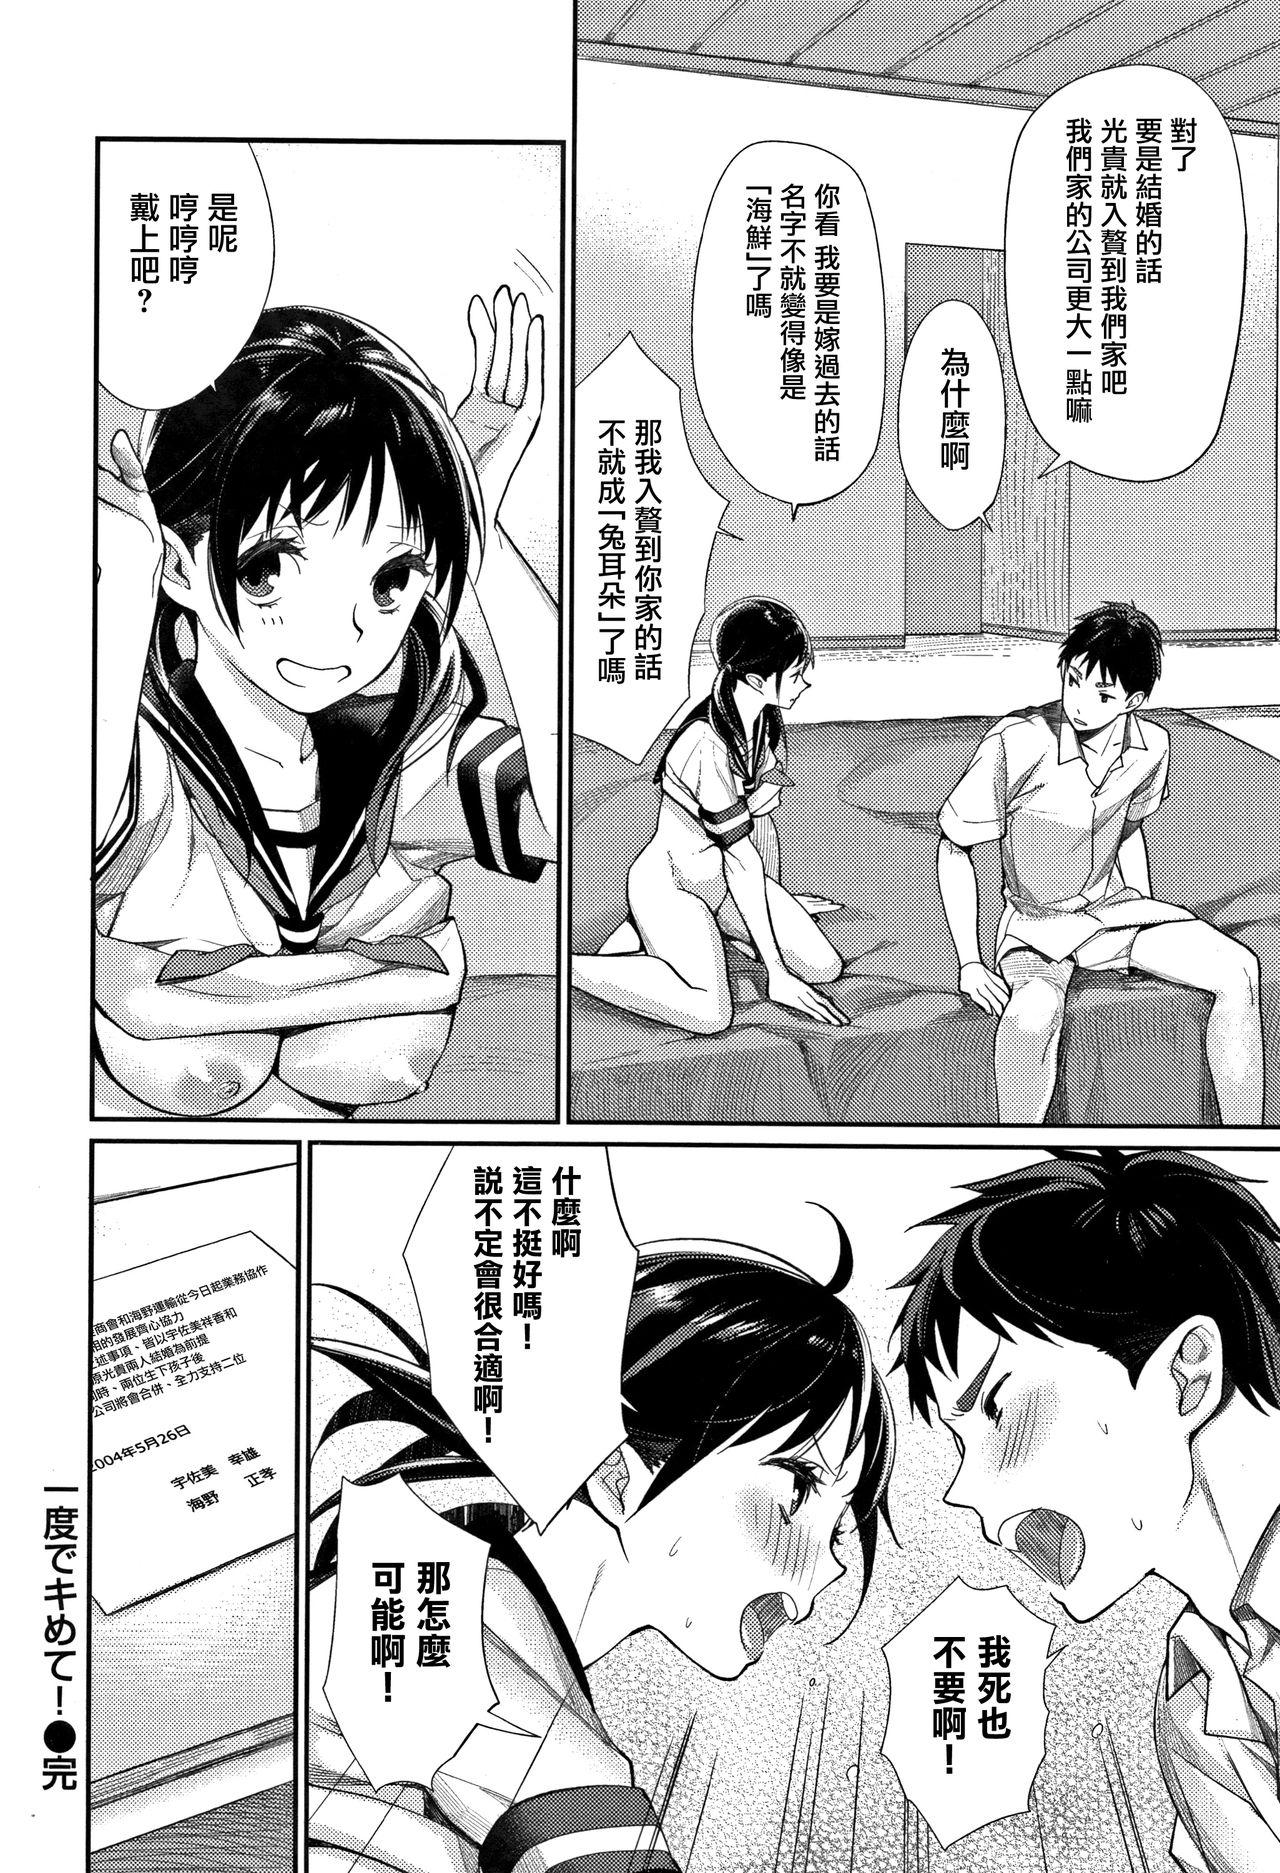 [MGMEE] Bokura no Etude - Our H Chu Do Ch.1-7 [Chinese] [無邪気漢化組] 99